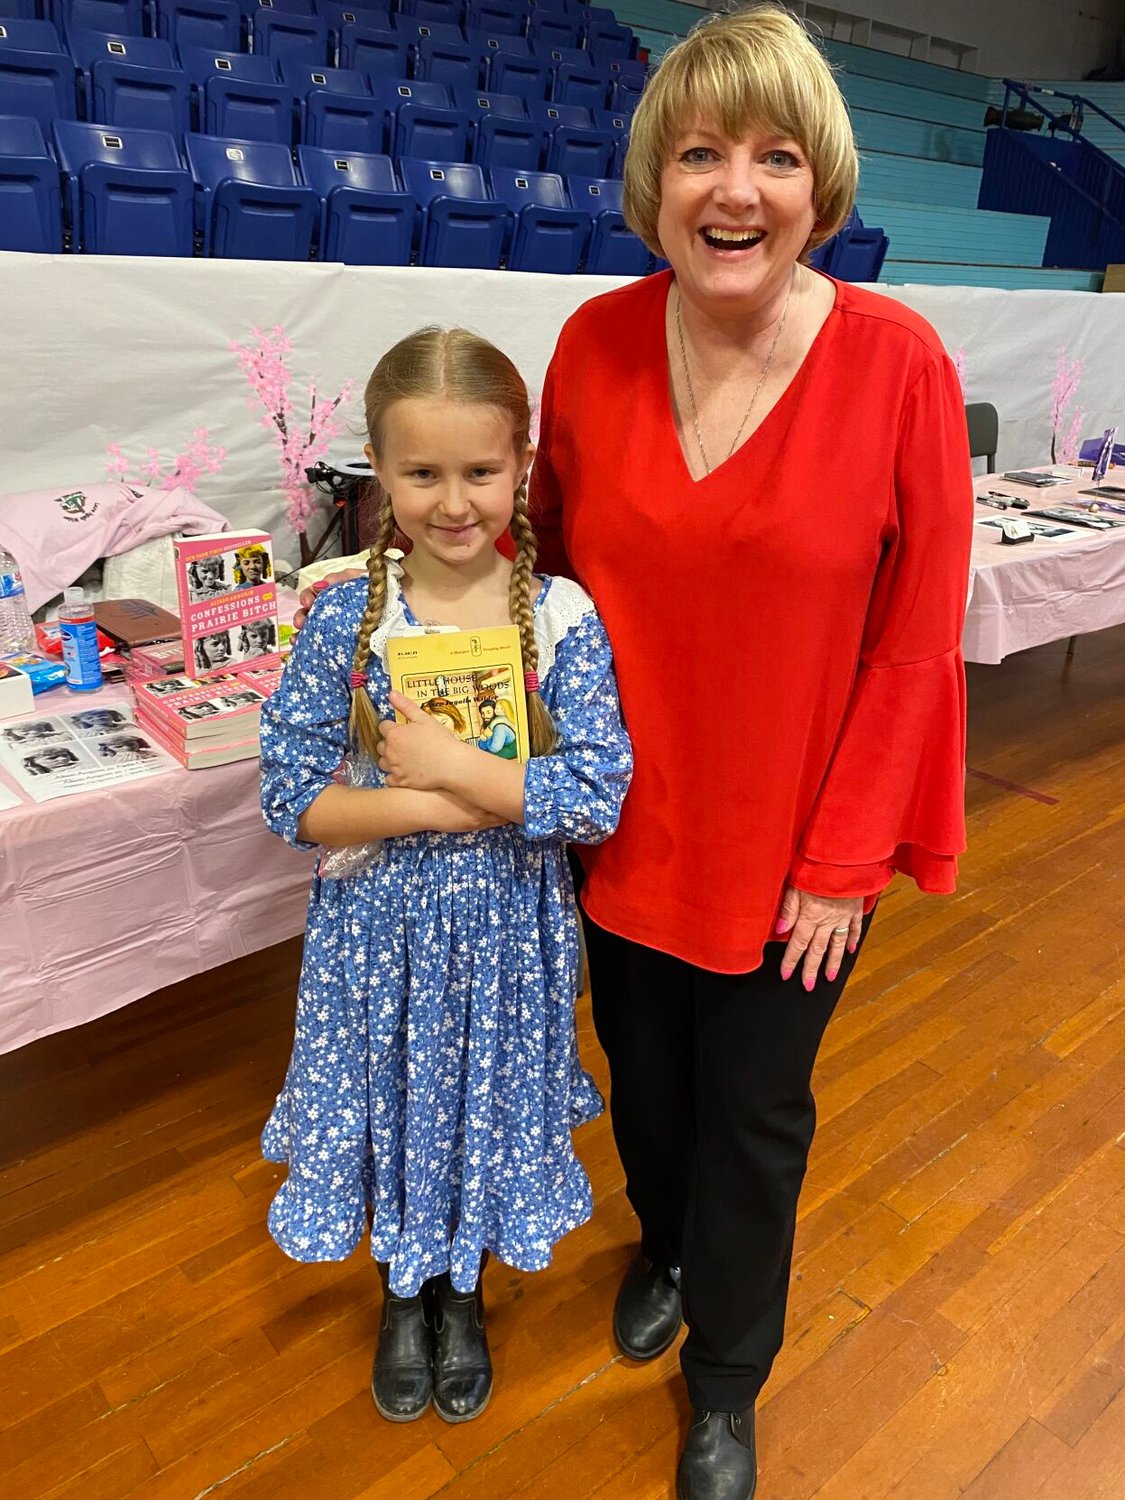 Marshfield third-grader Breanna Wheeler dressed for the occasion as she met Nellie Oleson from NBC’s Little House on the Prairie at the Nostalgia Fest Autograph Show. The event was held at the Marshfield Community Center as part of a string of festivities slotted for the Missouri Cherry Blossom Festival in Marshfield this past week. 